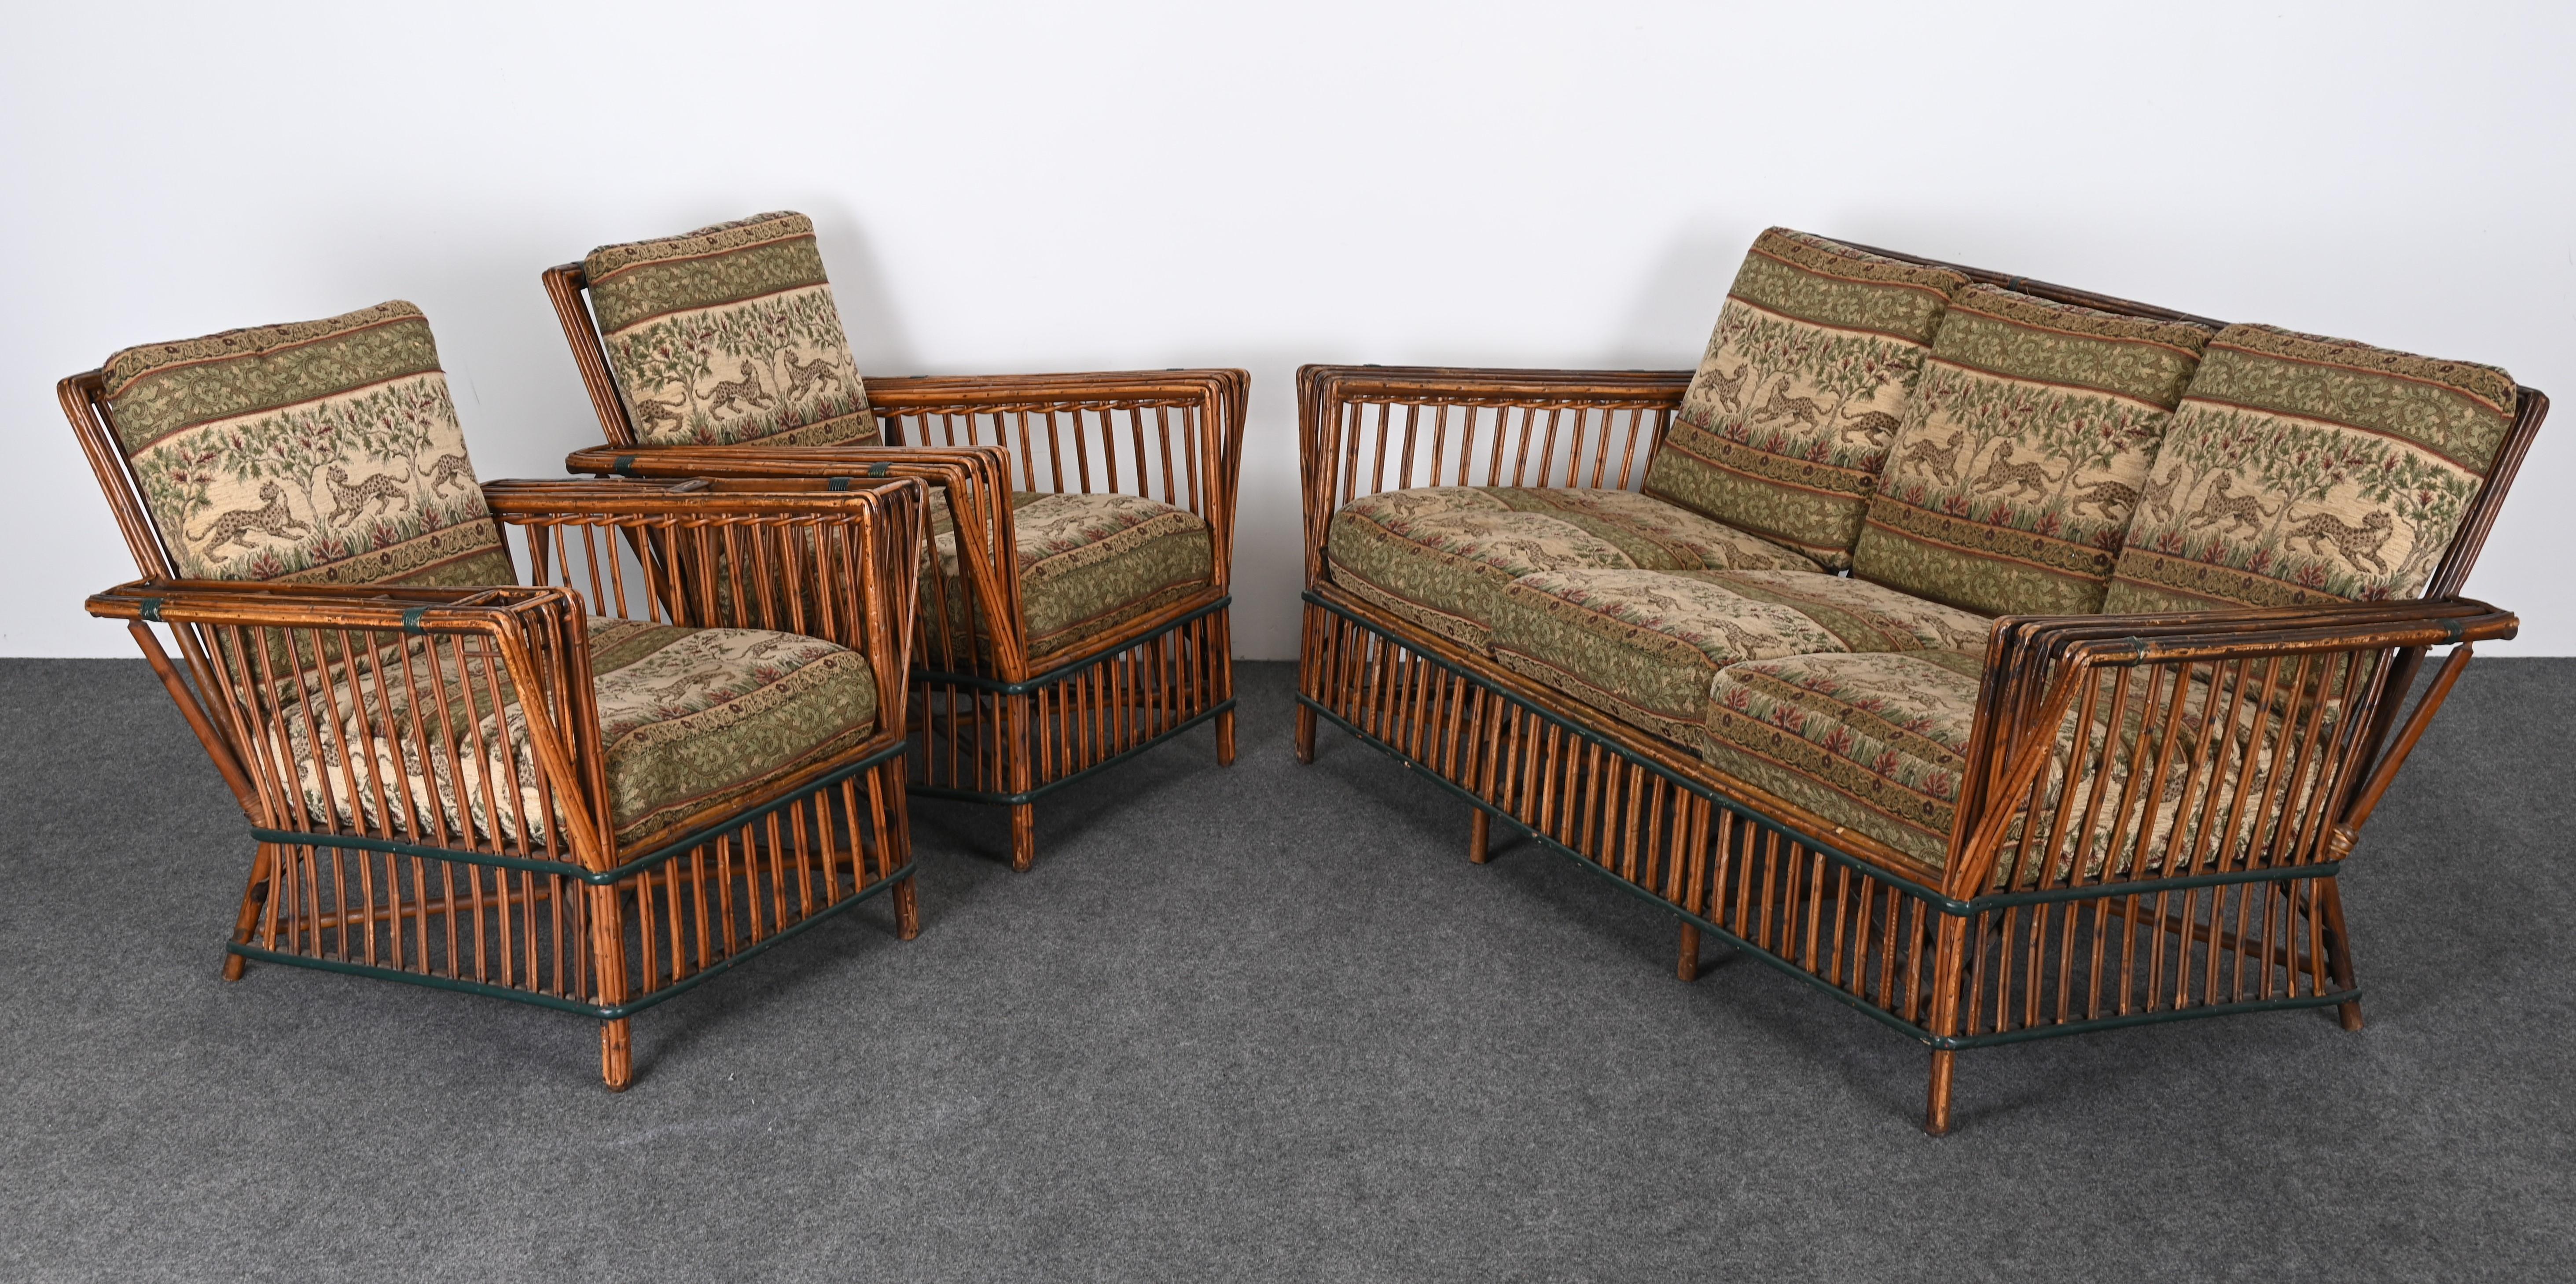 Art Deco Split Ypsilanti Stick Reed Wicker or Sofa with Pair Arm Chairs c. 1930s In Good Condition For Sale In Hamburg, PA